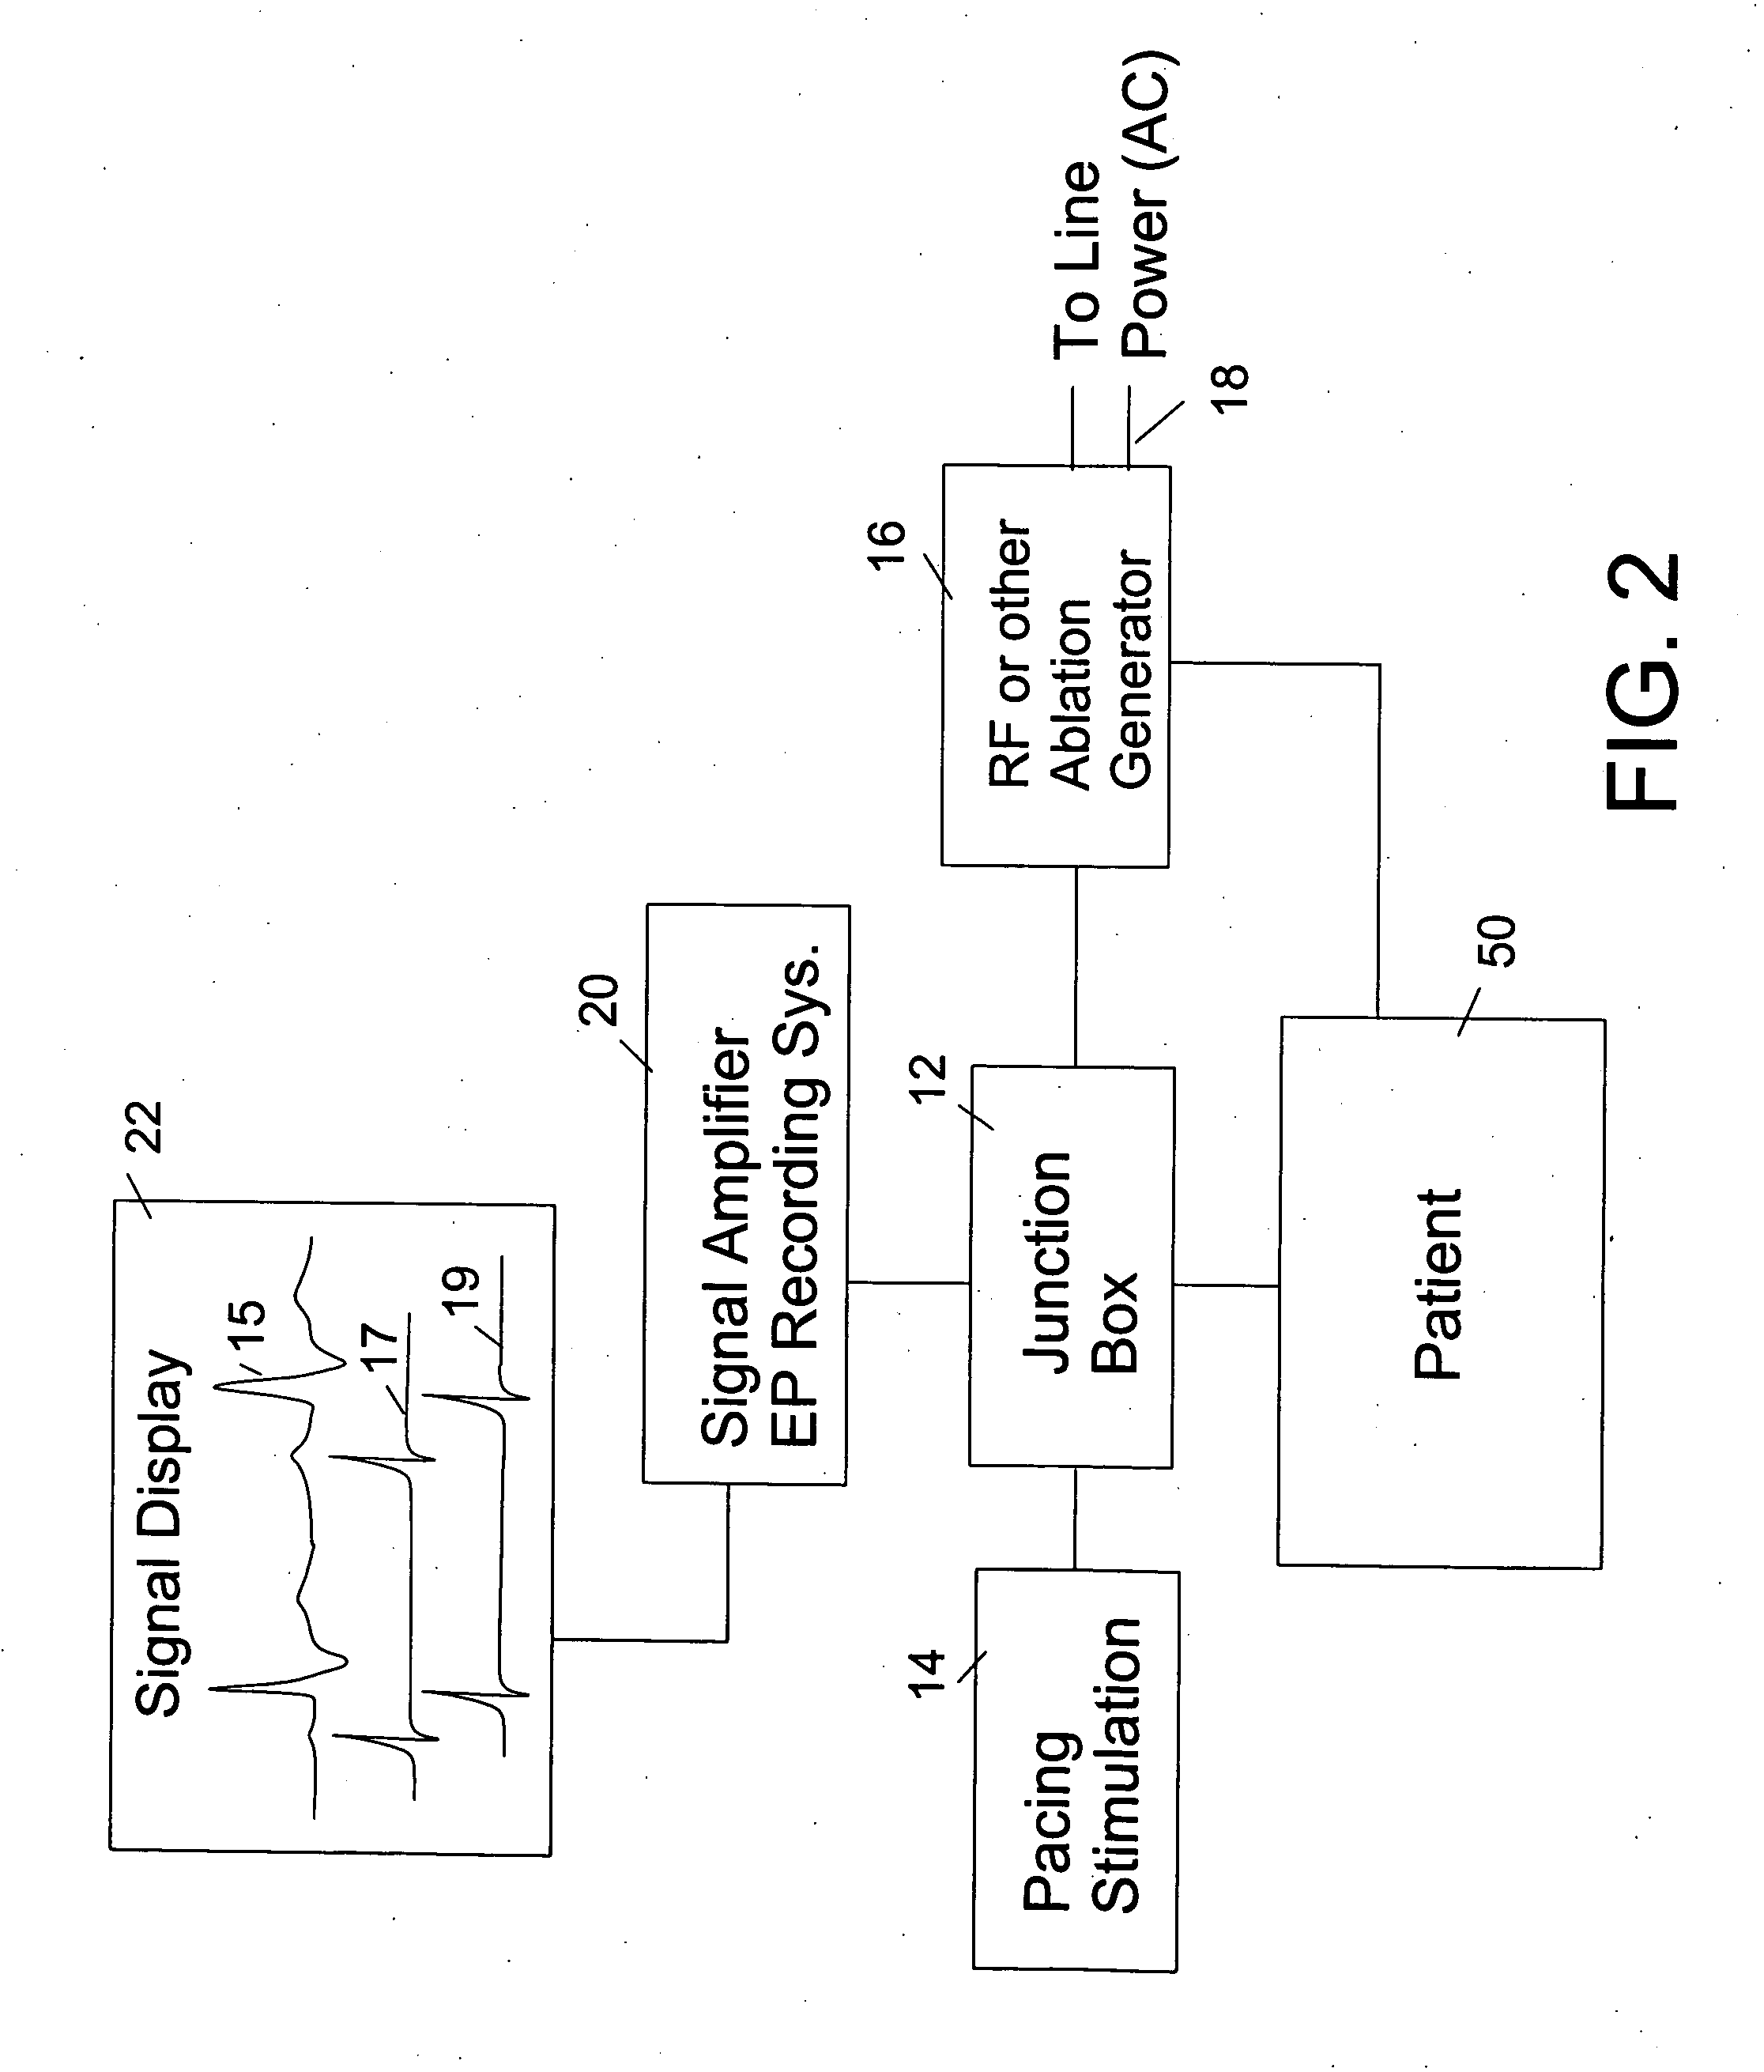 Method and system for monitoring atrial fibrillation ablations with an ablation interface device